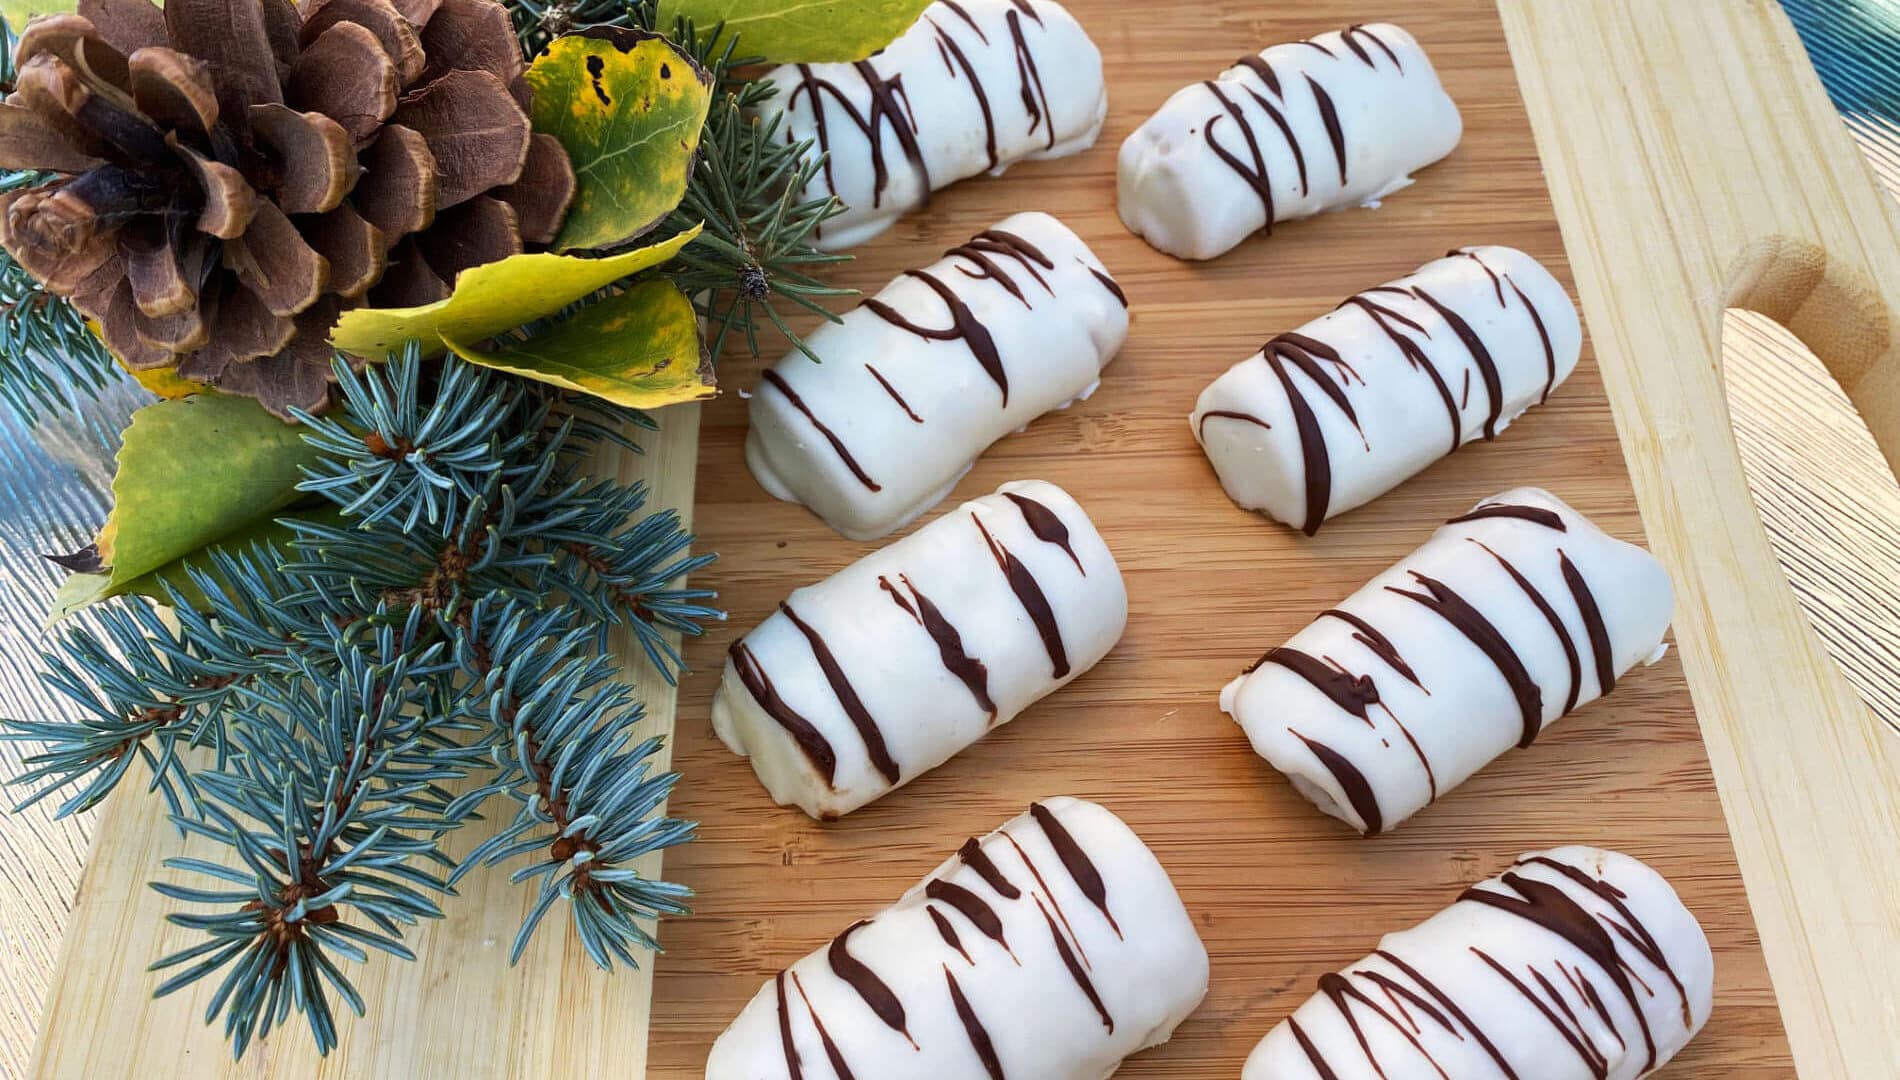 White chocolate coated cookies with dark chocolate stripes, looking like birch logs, with green pine branches, yellow aspen leaves, and a brown pine cone